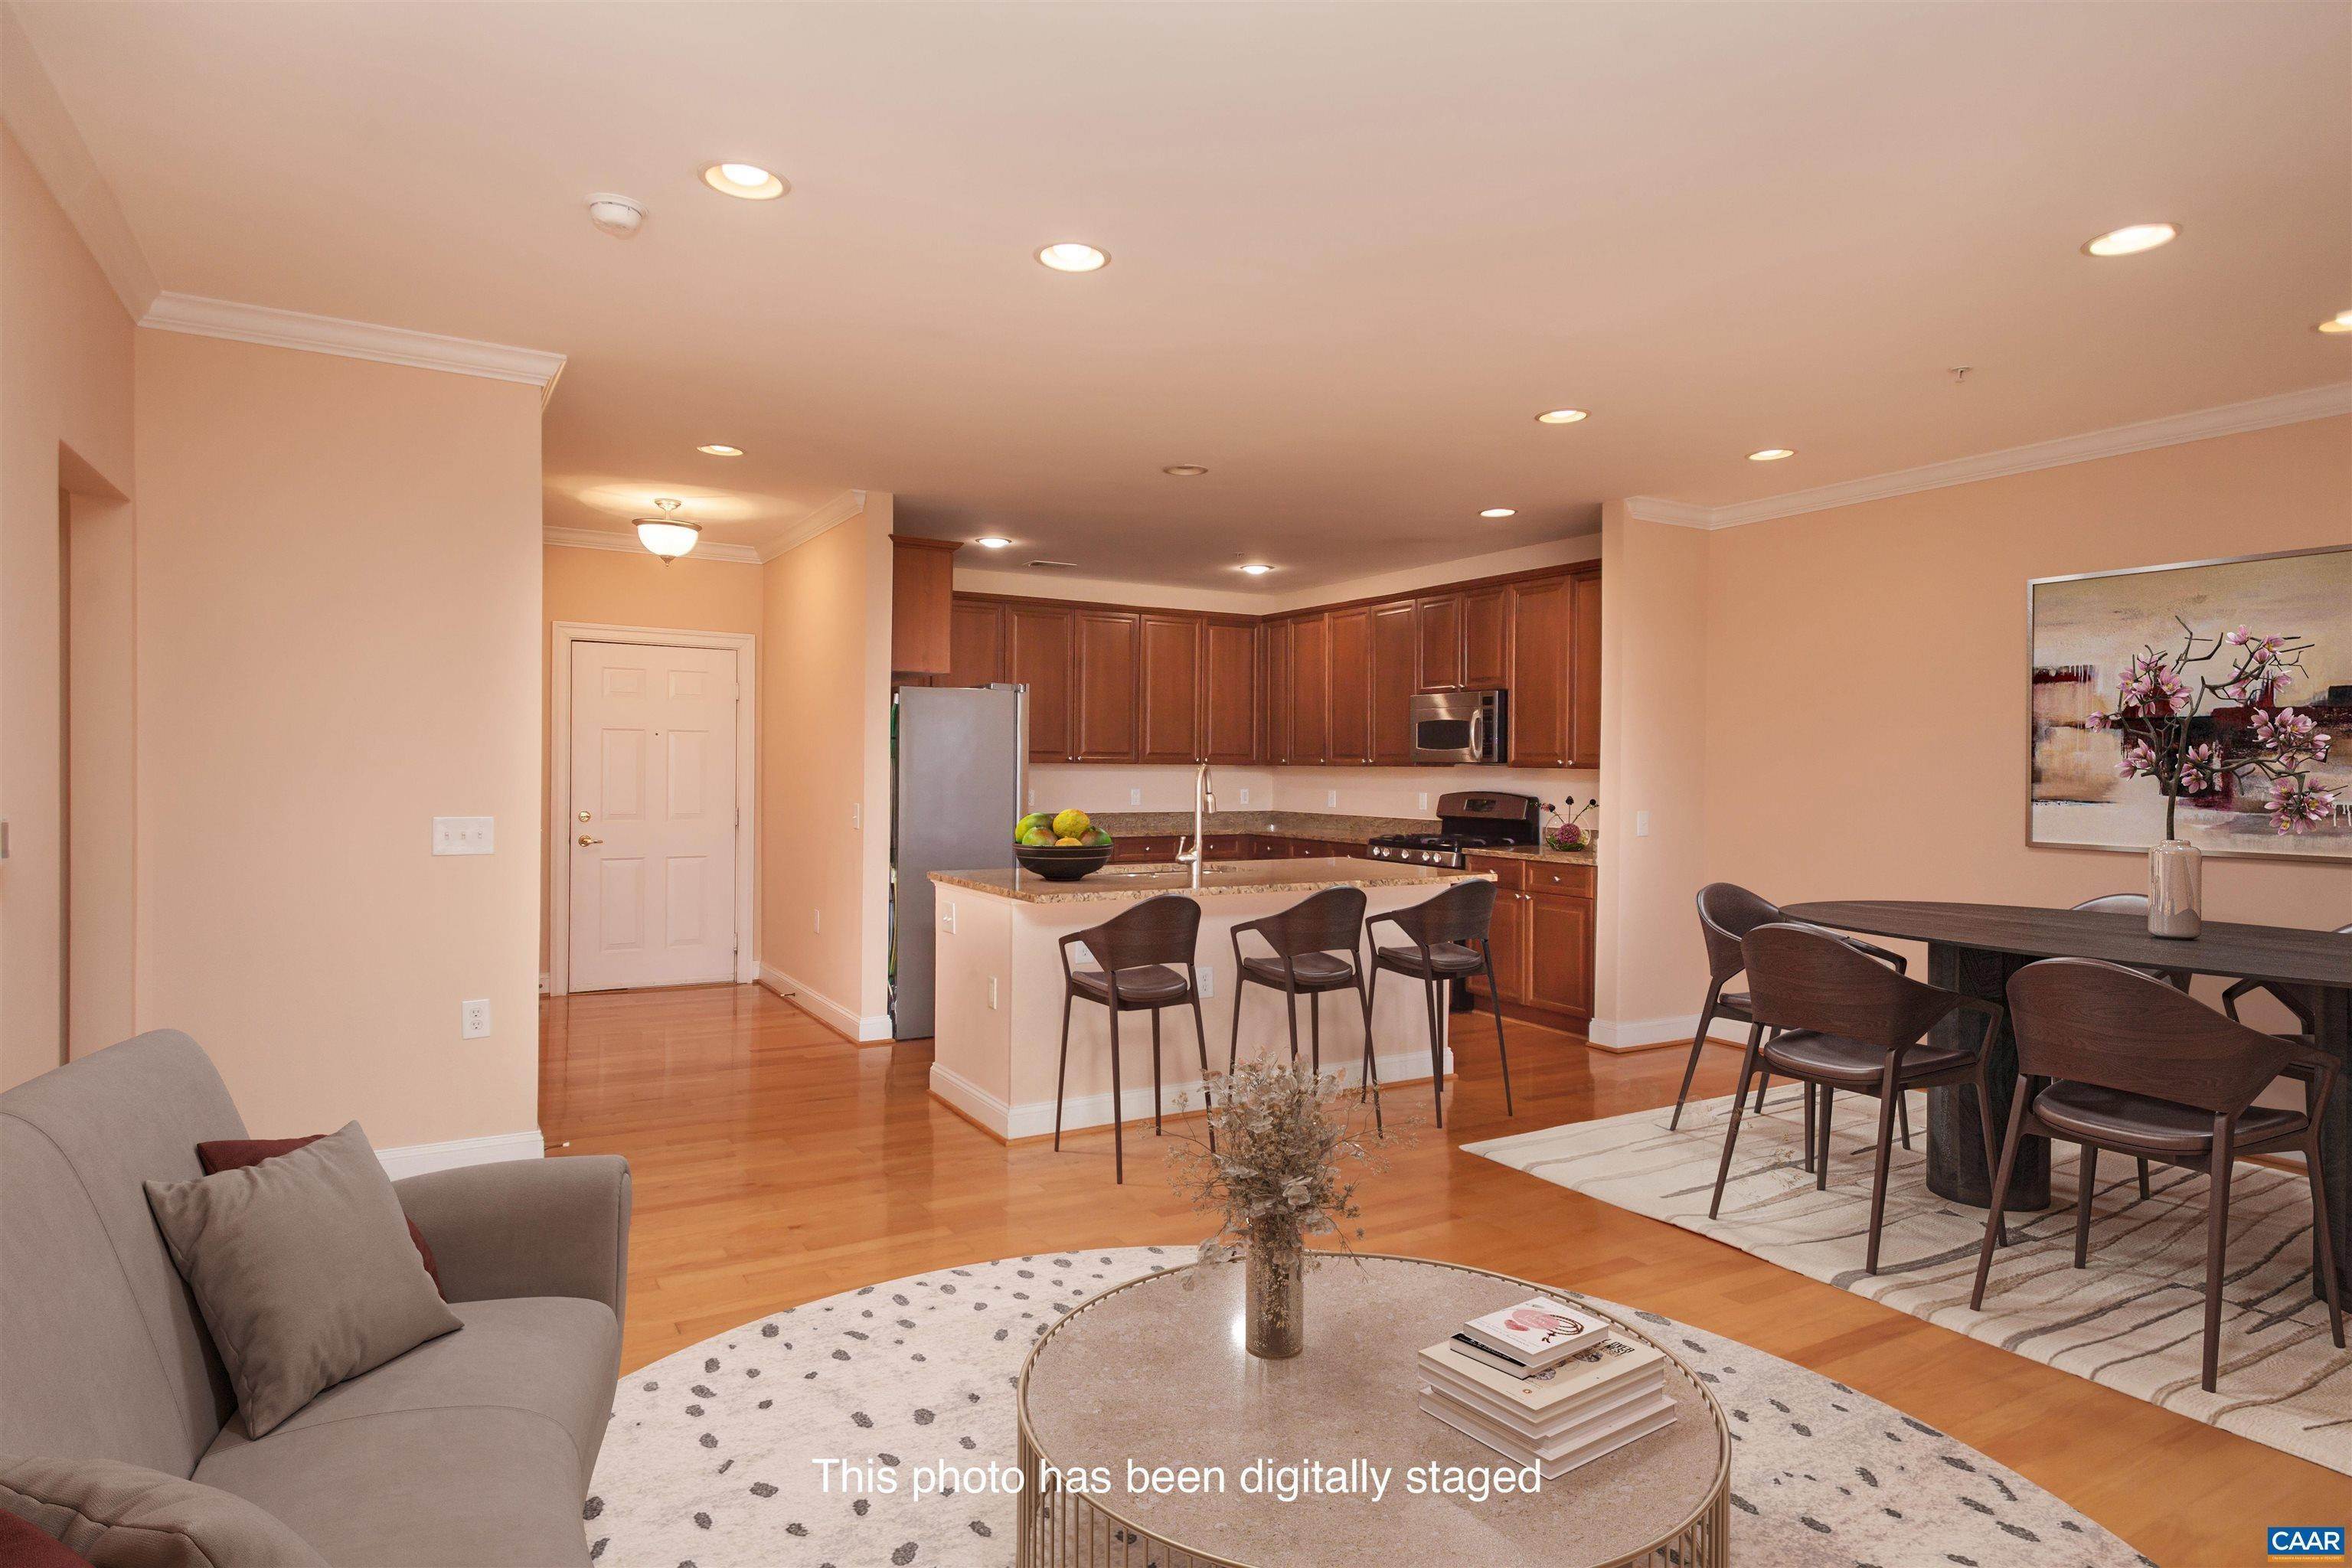 2. Condominiums for Sale at 1051 GLENWOOD STATION LN #304 Charlottesville, Virginia 22901 United States